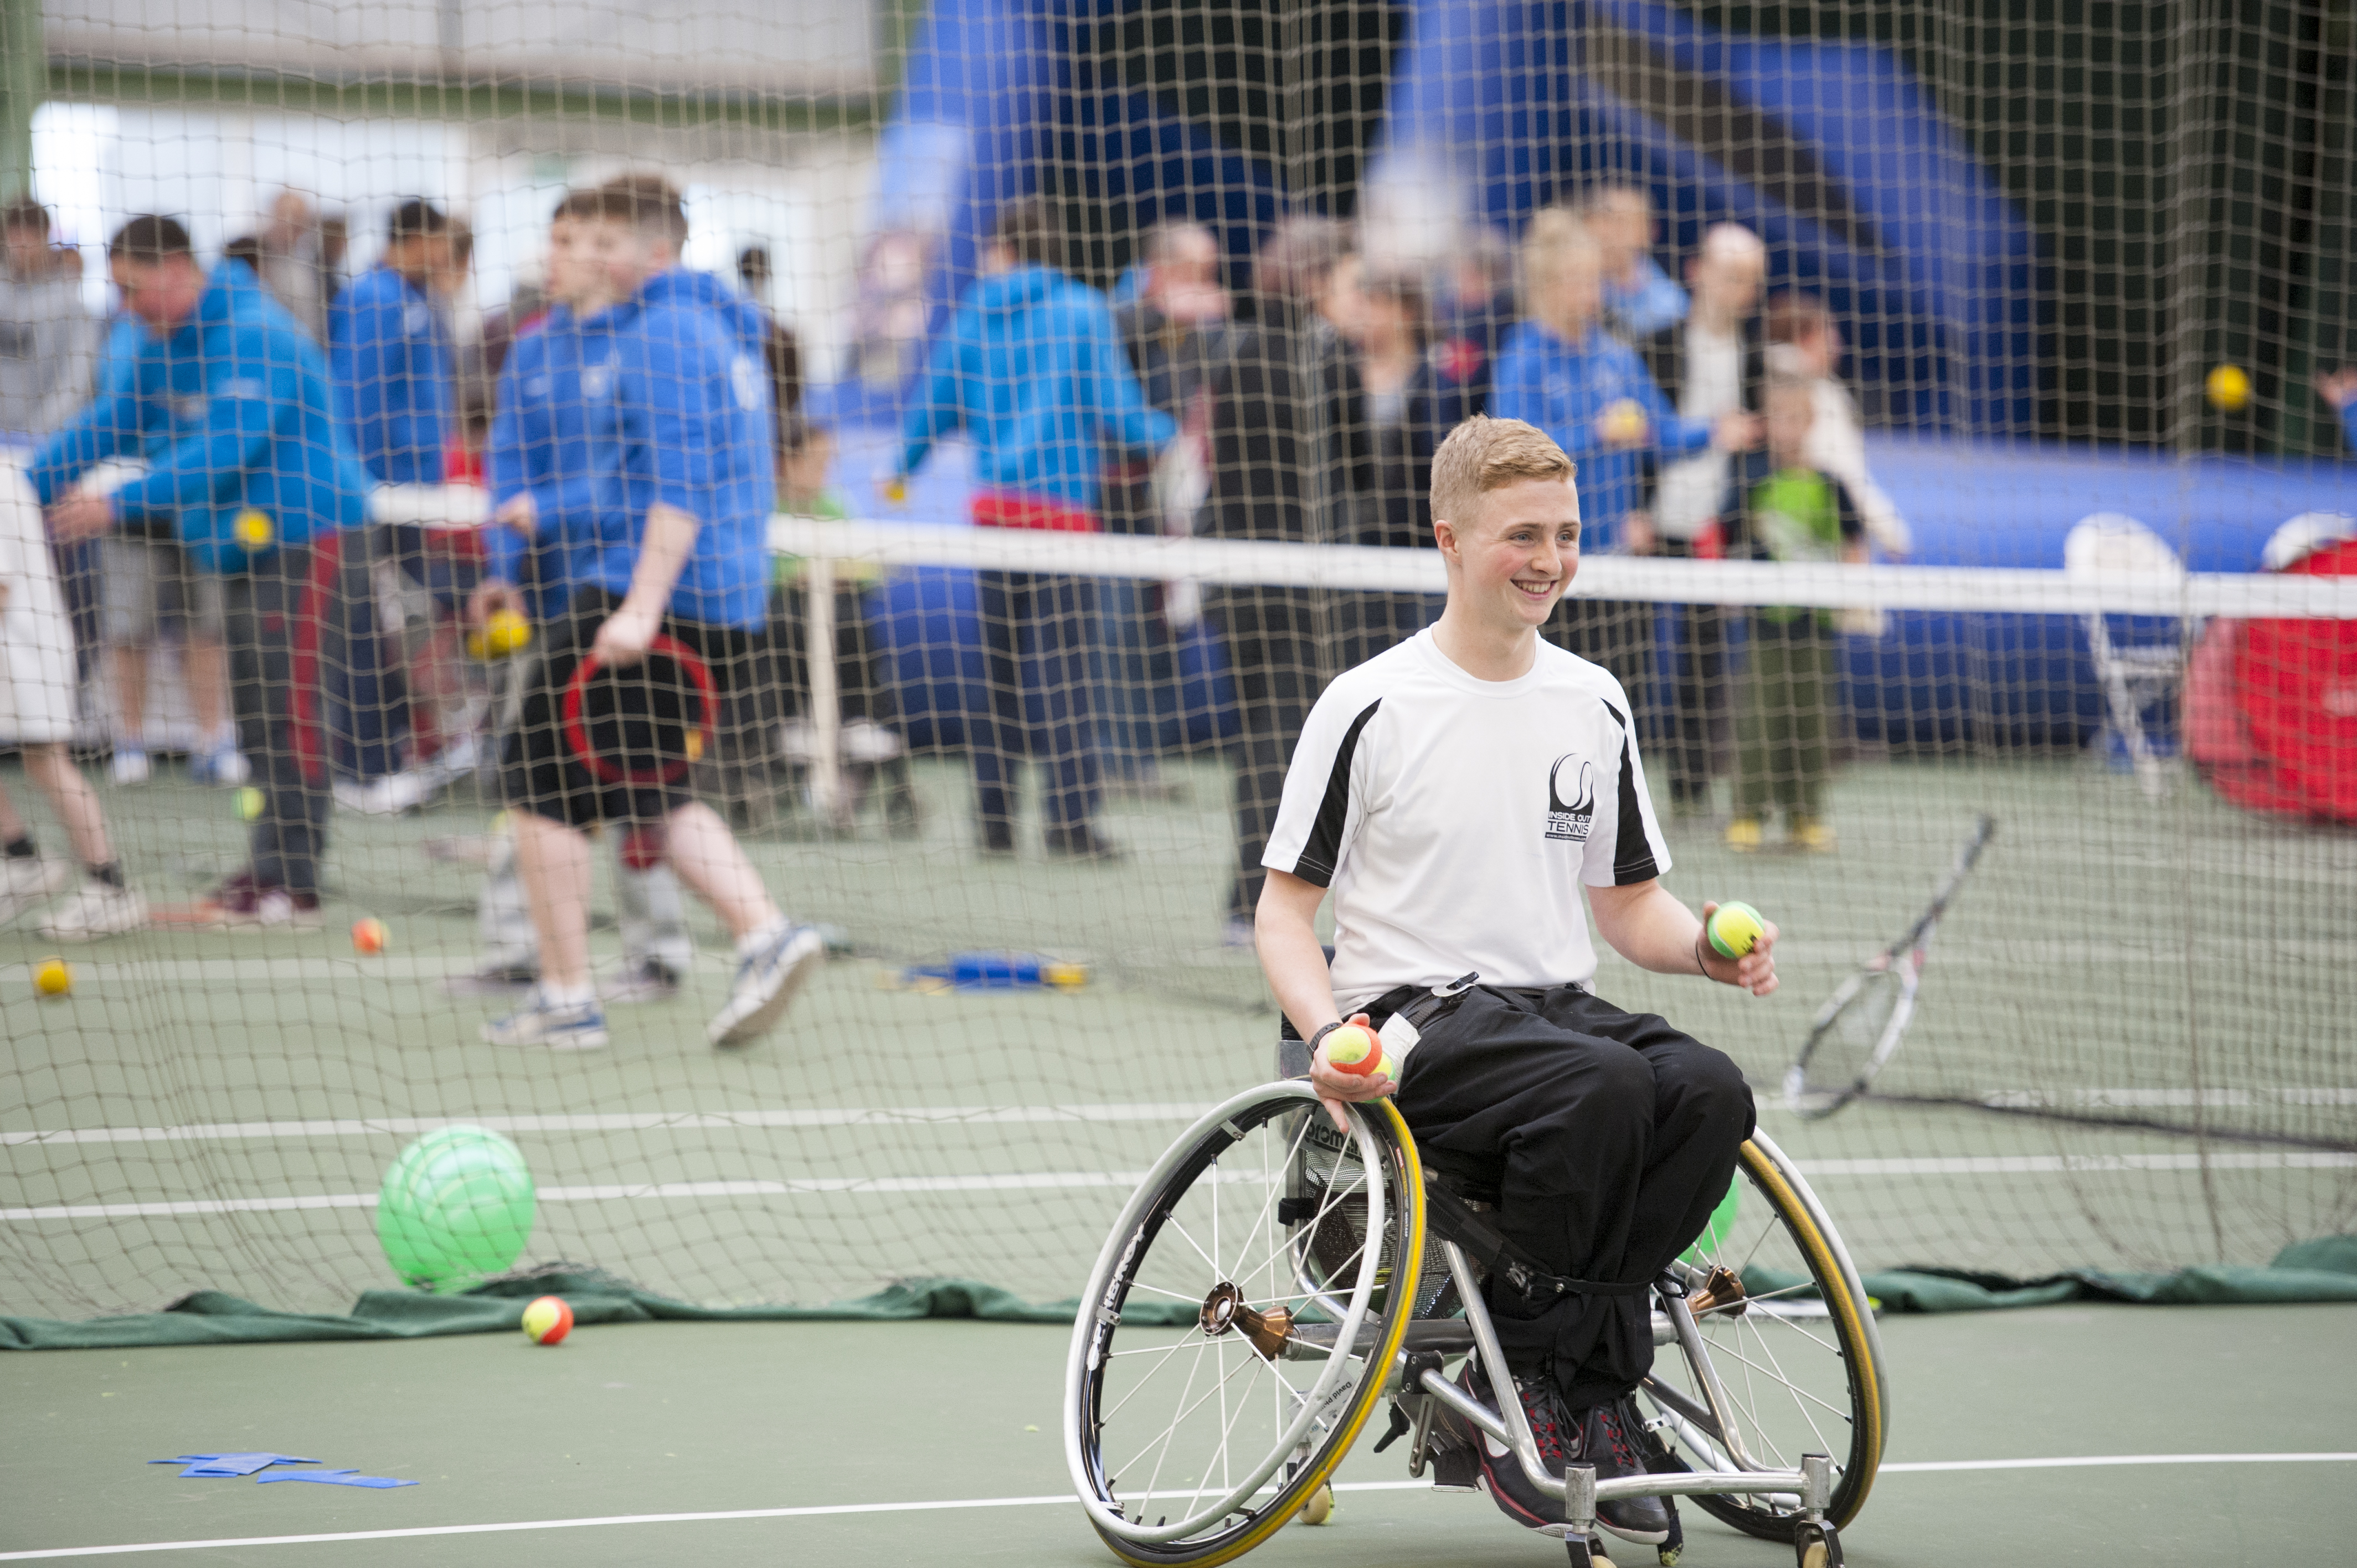 A photo of a student playing wheelchair tennis.